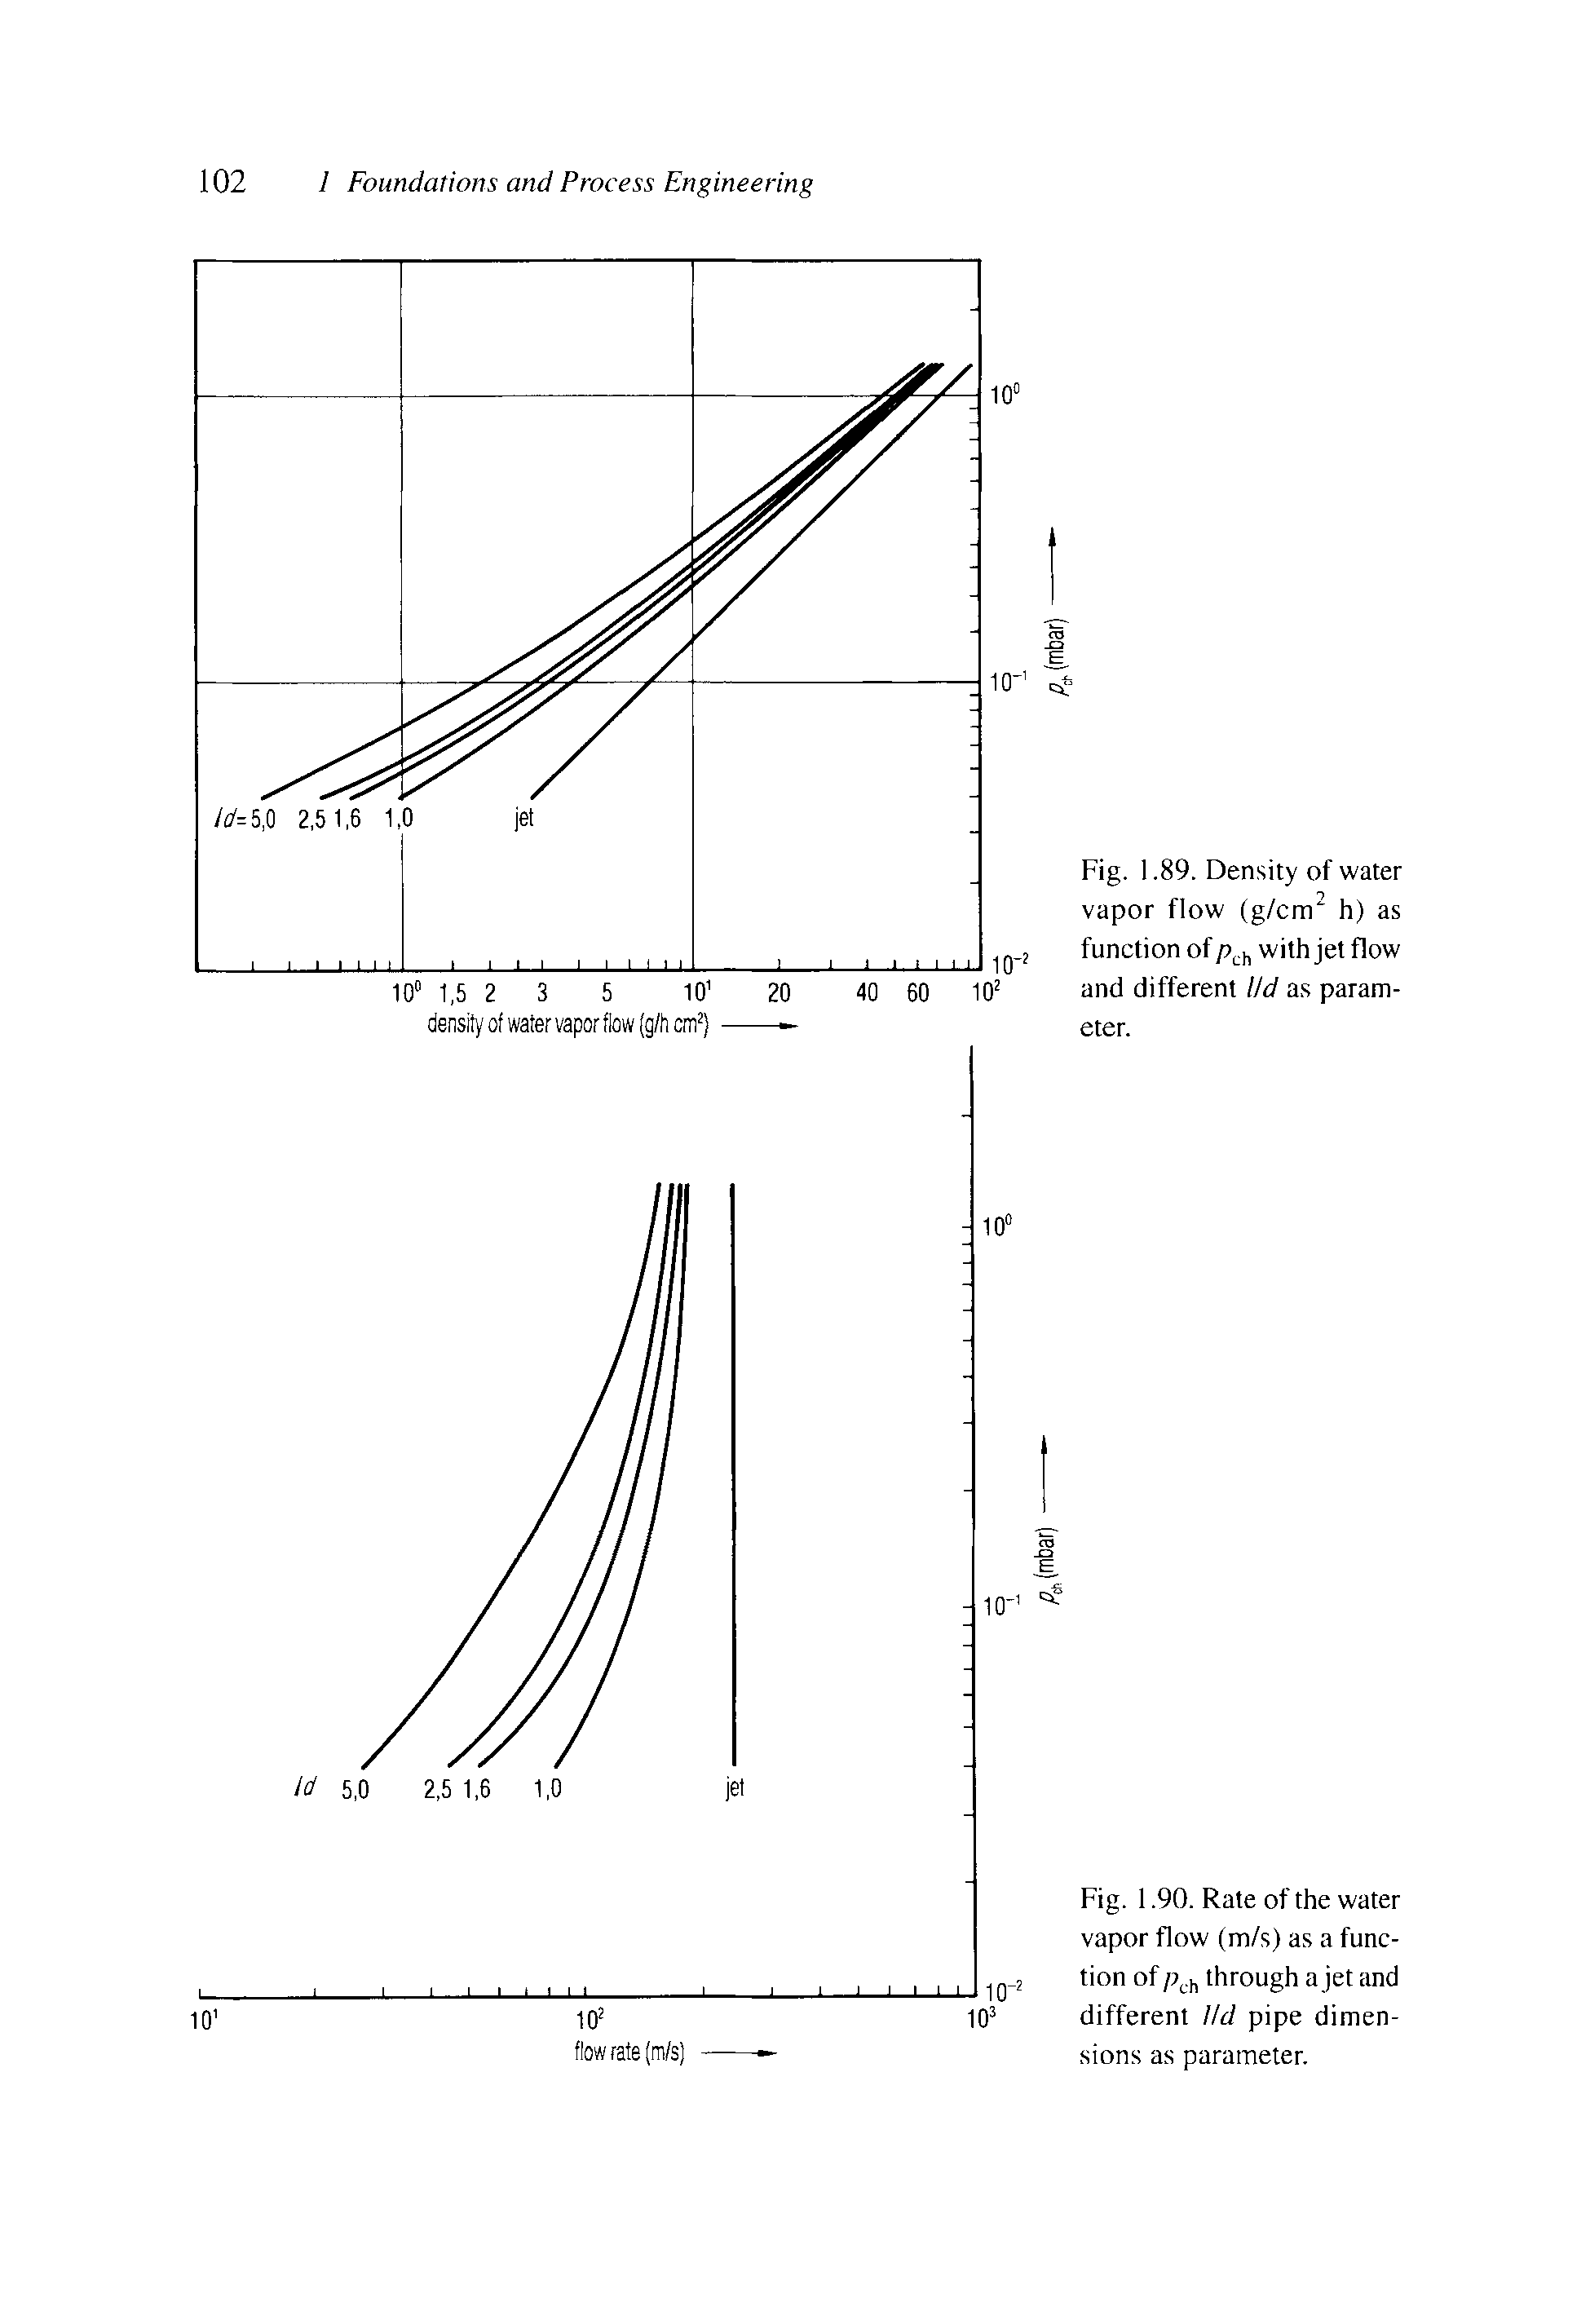 Fig. 1.90. Rate of the water vapor flow (m/s) as a function of pch through a jet and different Ud pipe dimensions as parameter.